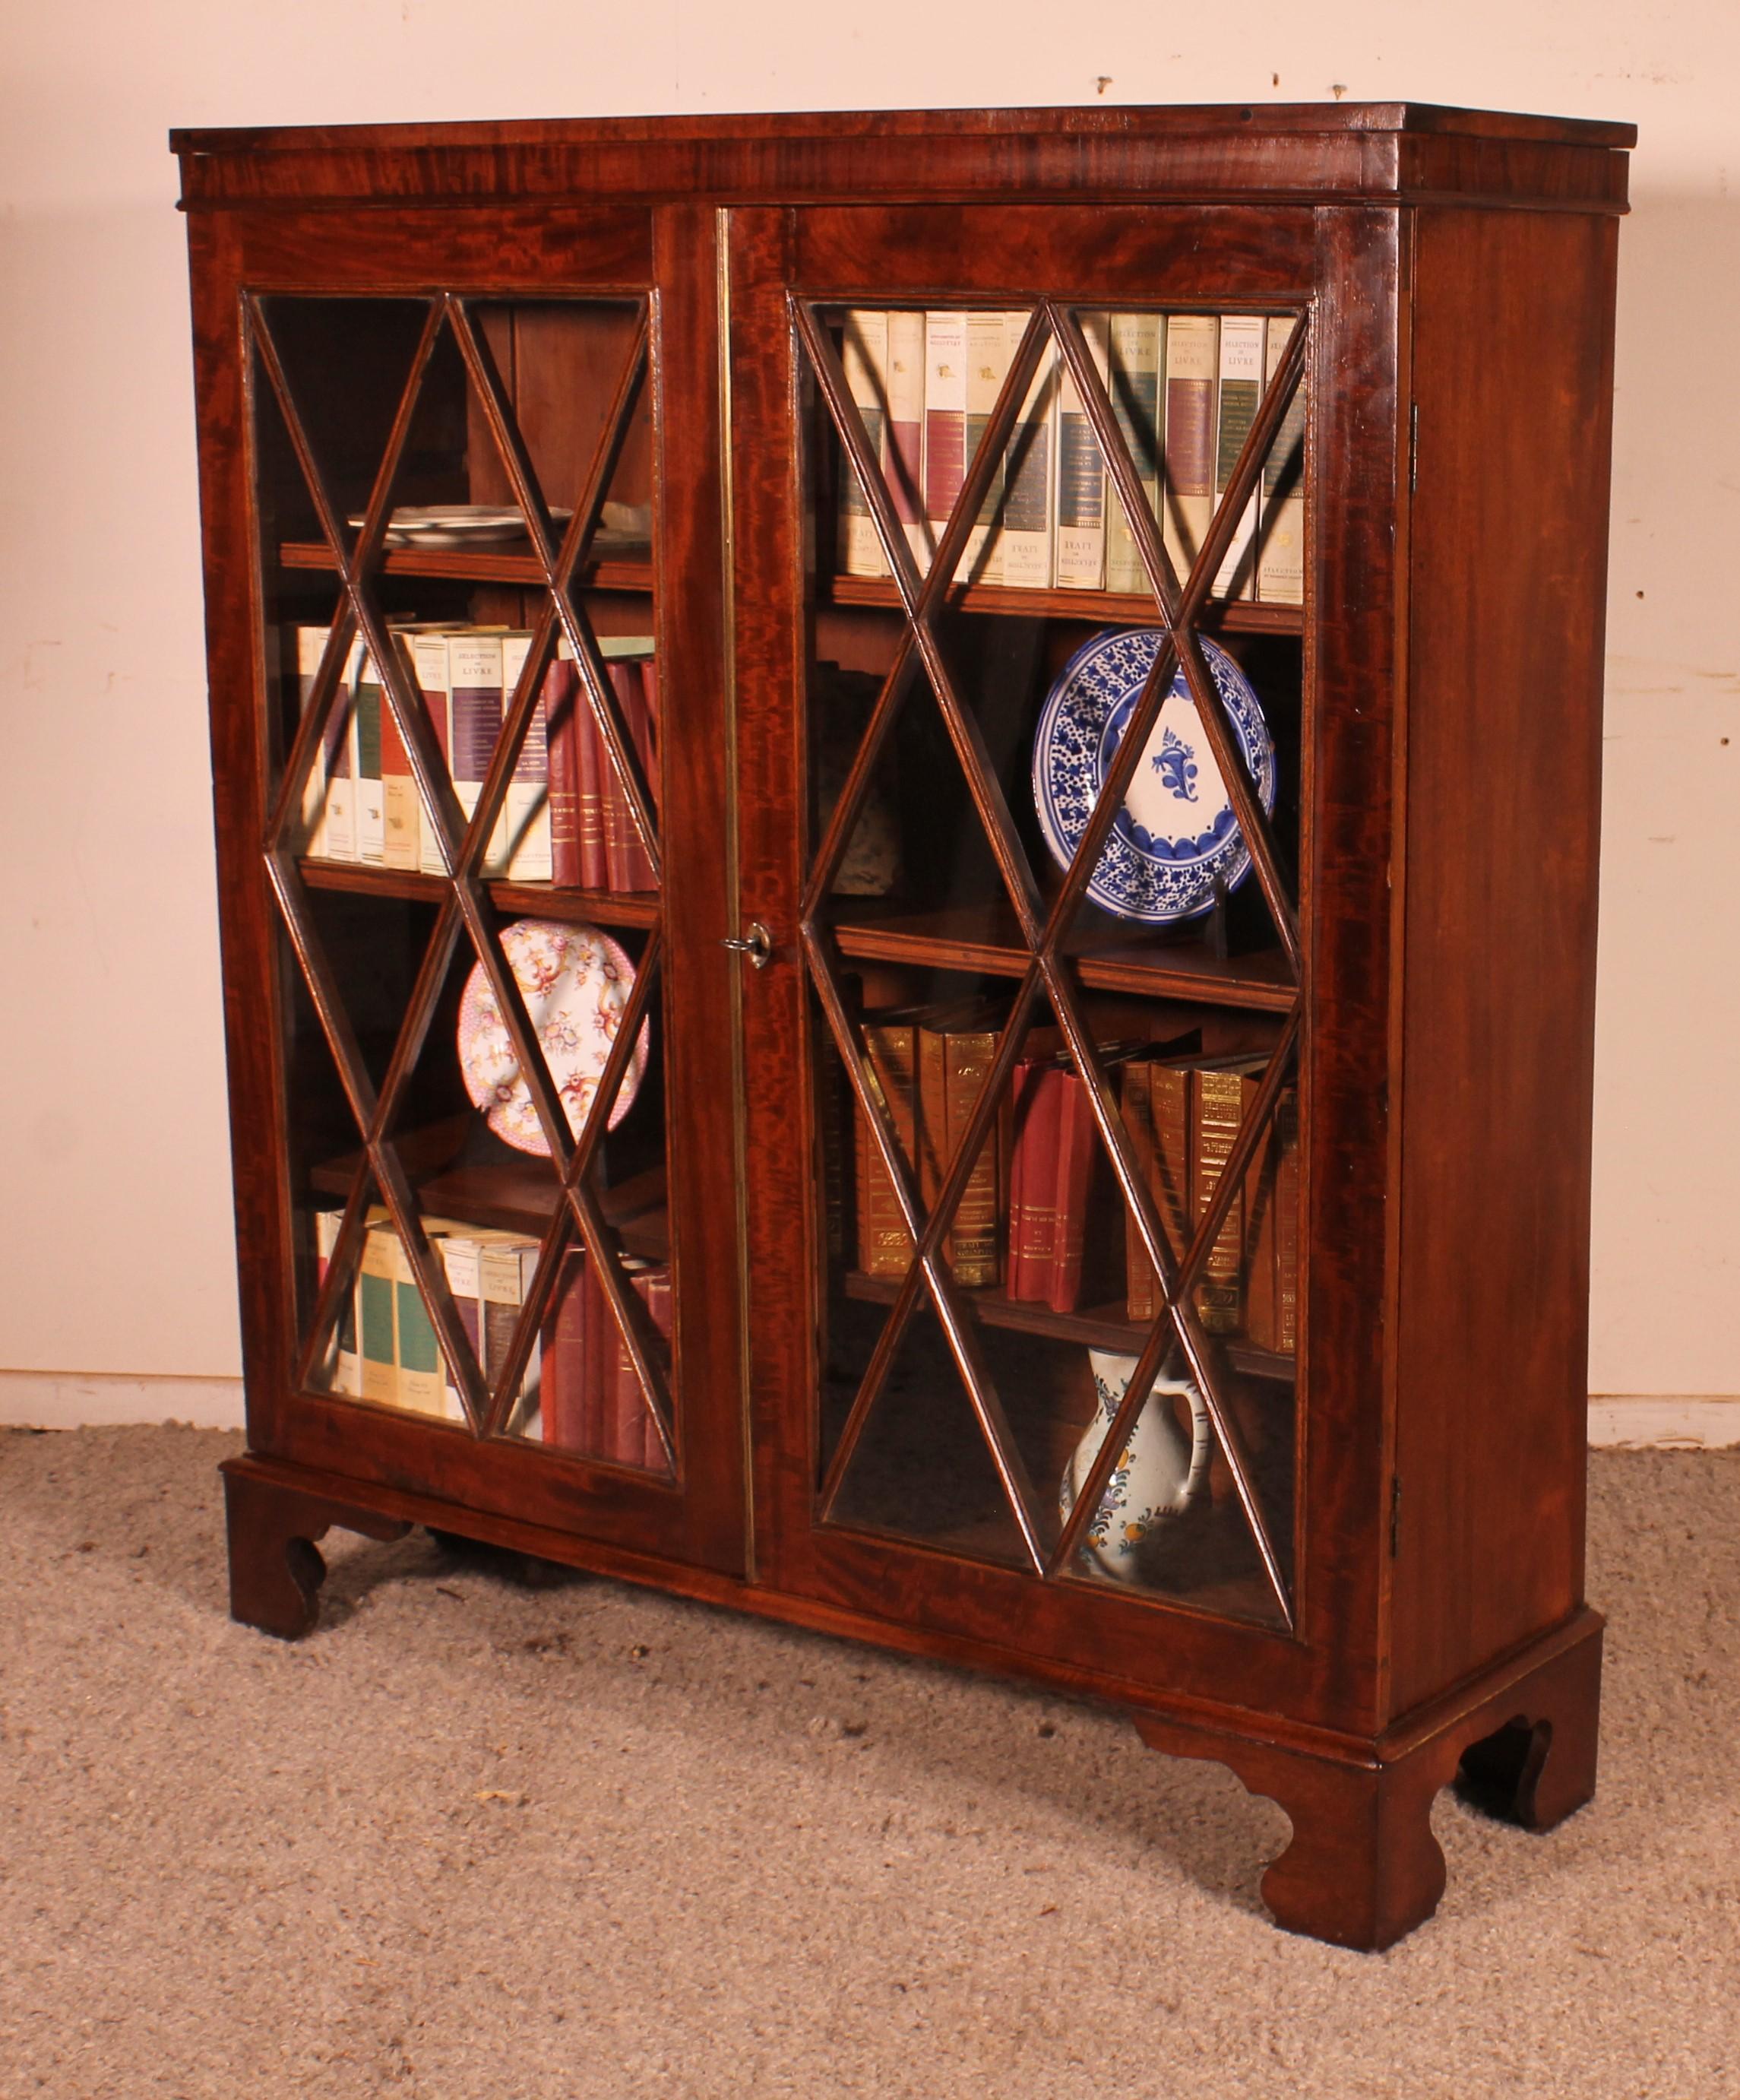 Mahogany Glazed Bookcase From The 19th Century - England For Sale 6